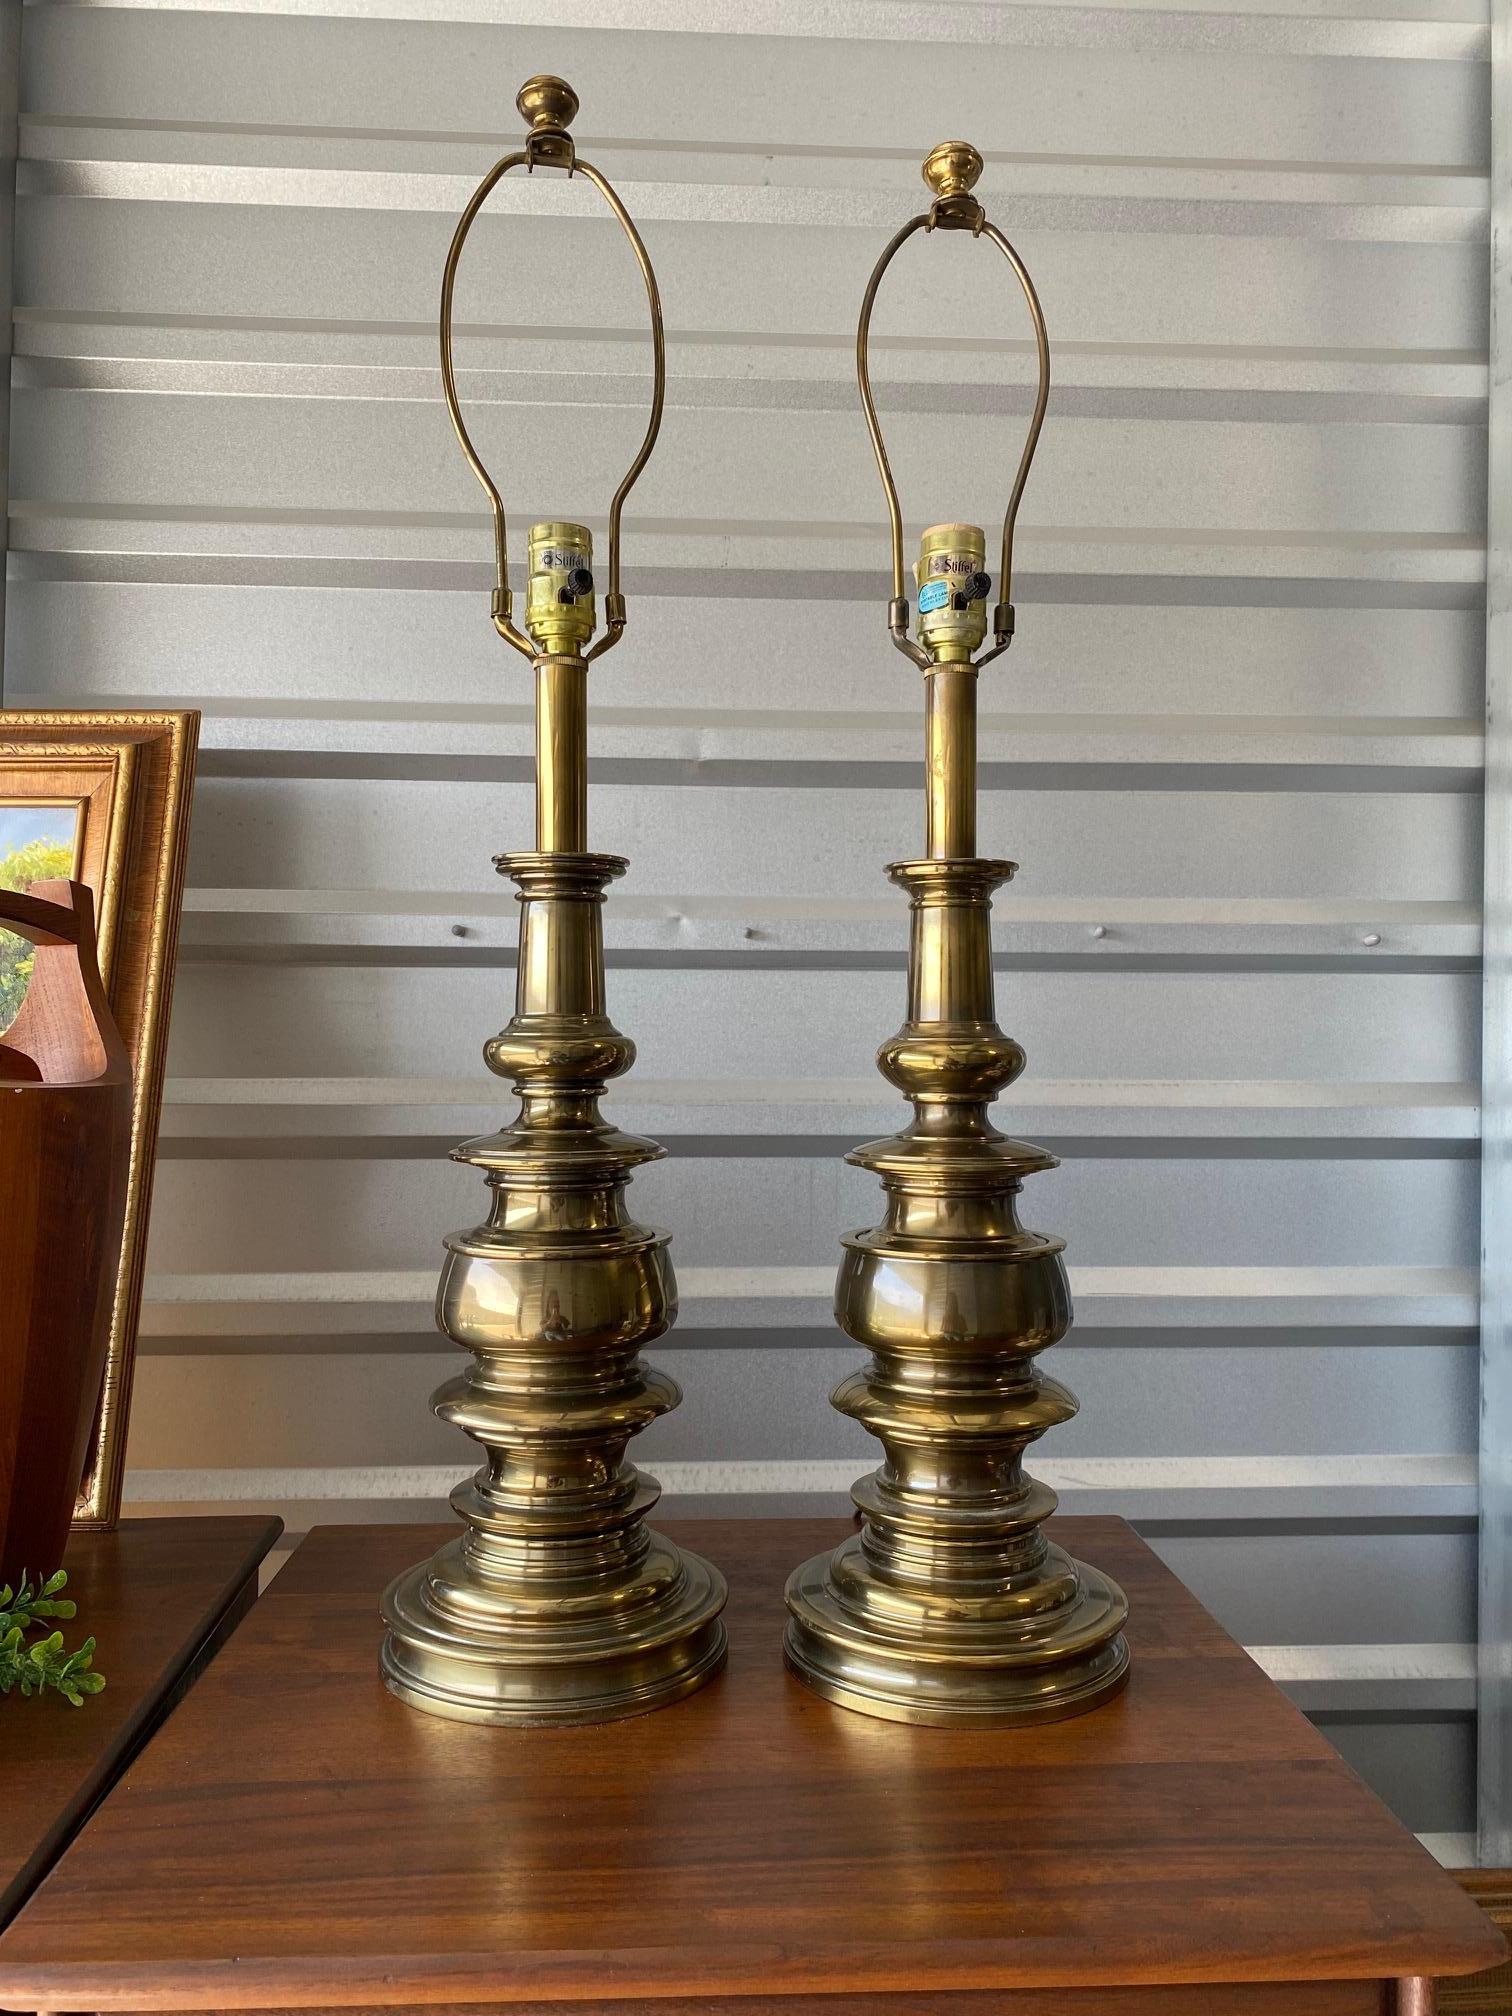 This is a beautiful pair of brass lamps by Stiffel. Such a gorgeous design. Spots of tarnish from age, but appropriate wear. Perfect table lamps to compliment any living space in your home.